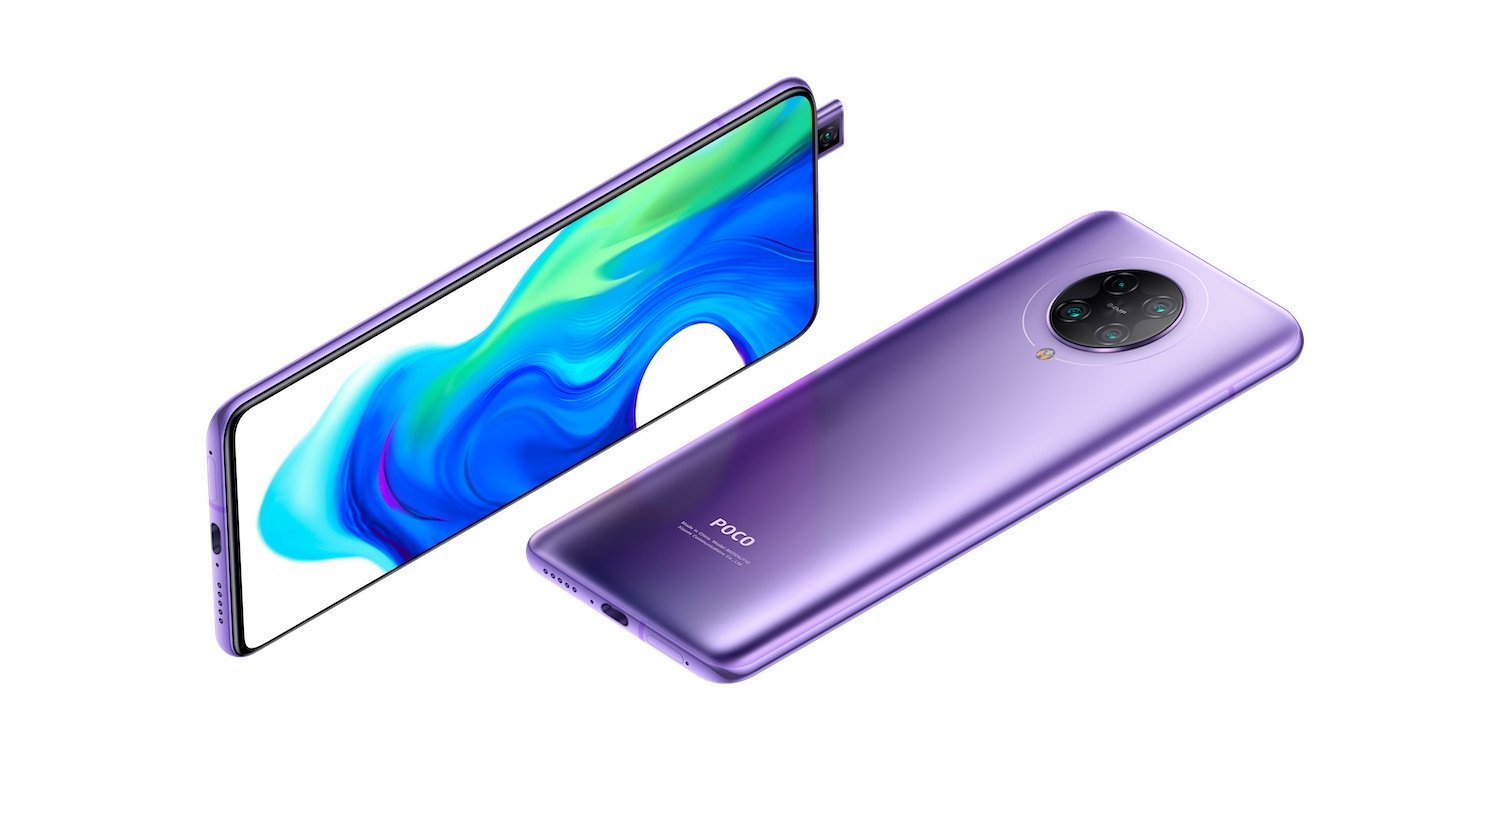 [Updated] Poco F2 Pro MIUI 12 update begins rolling out in stable version (Download link inside)